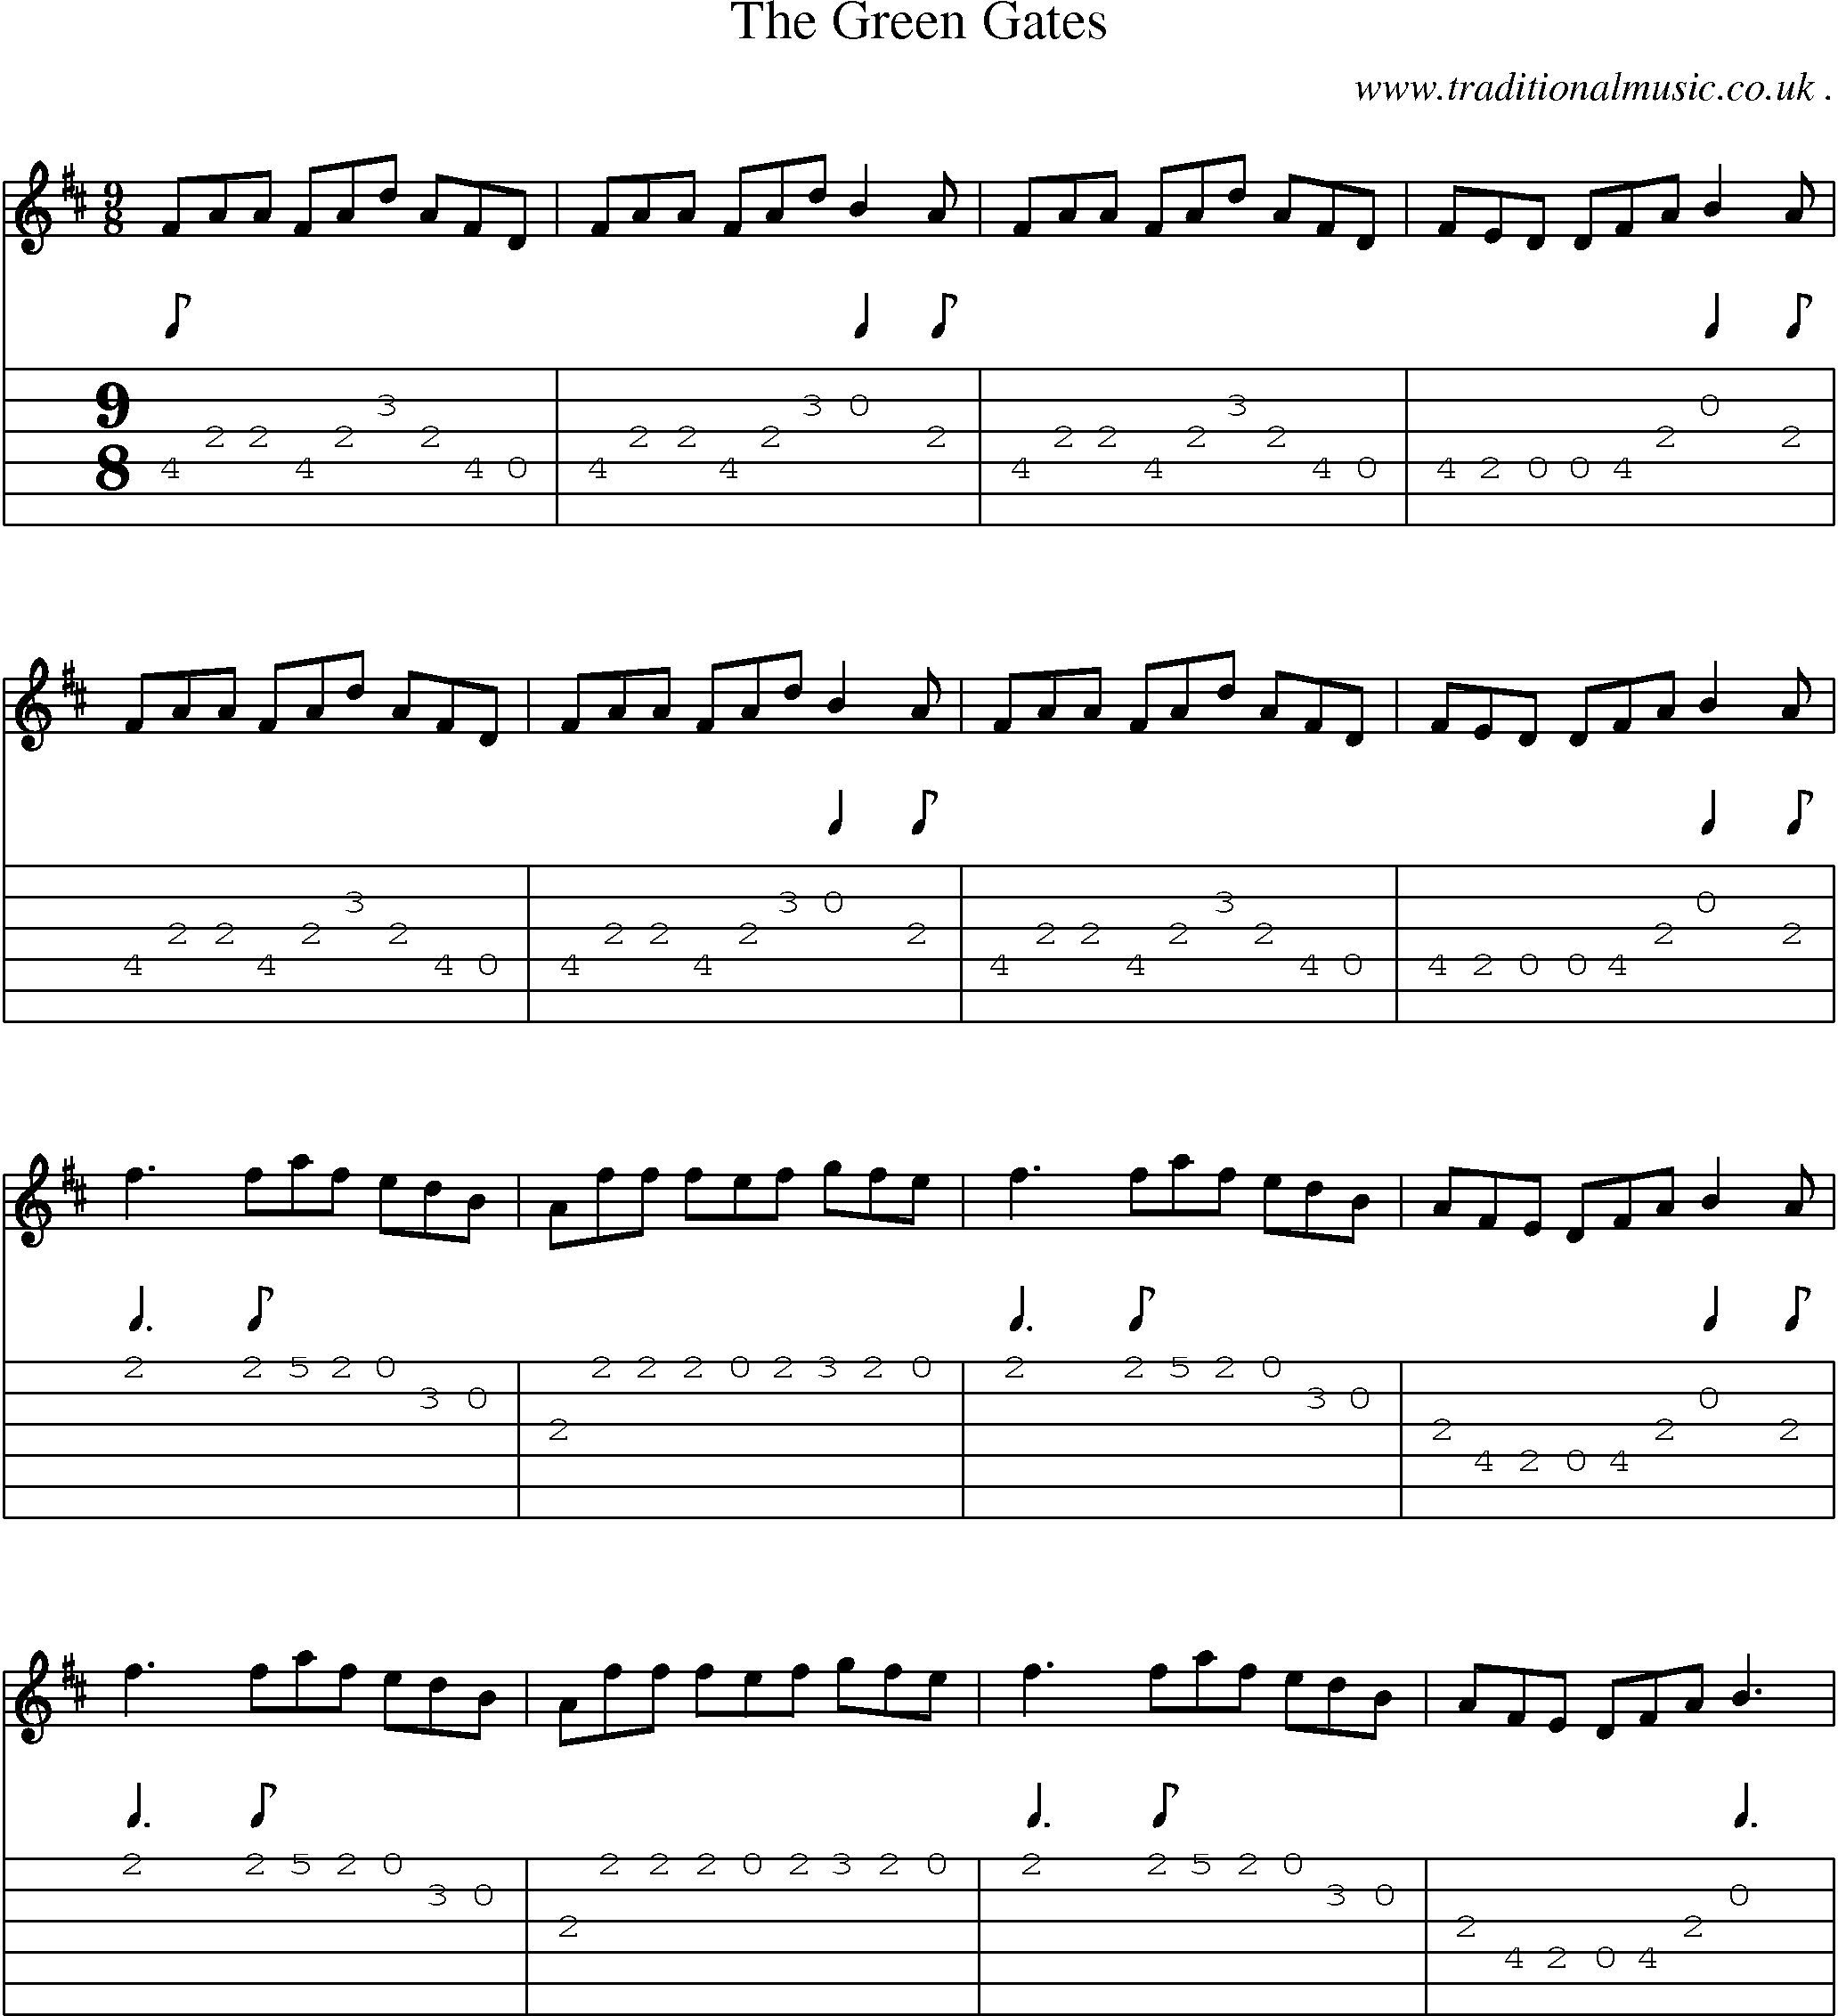 Sheet-Music and Guitar Tabs for The Green Gates